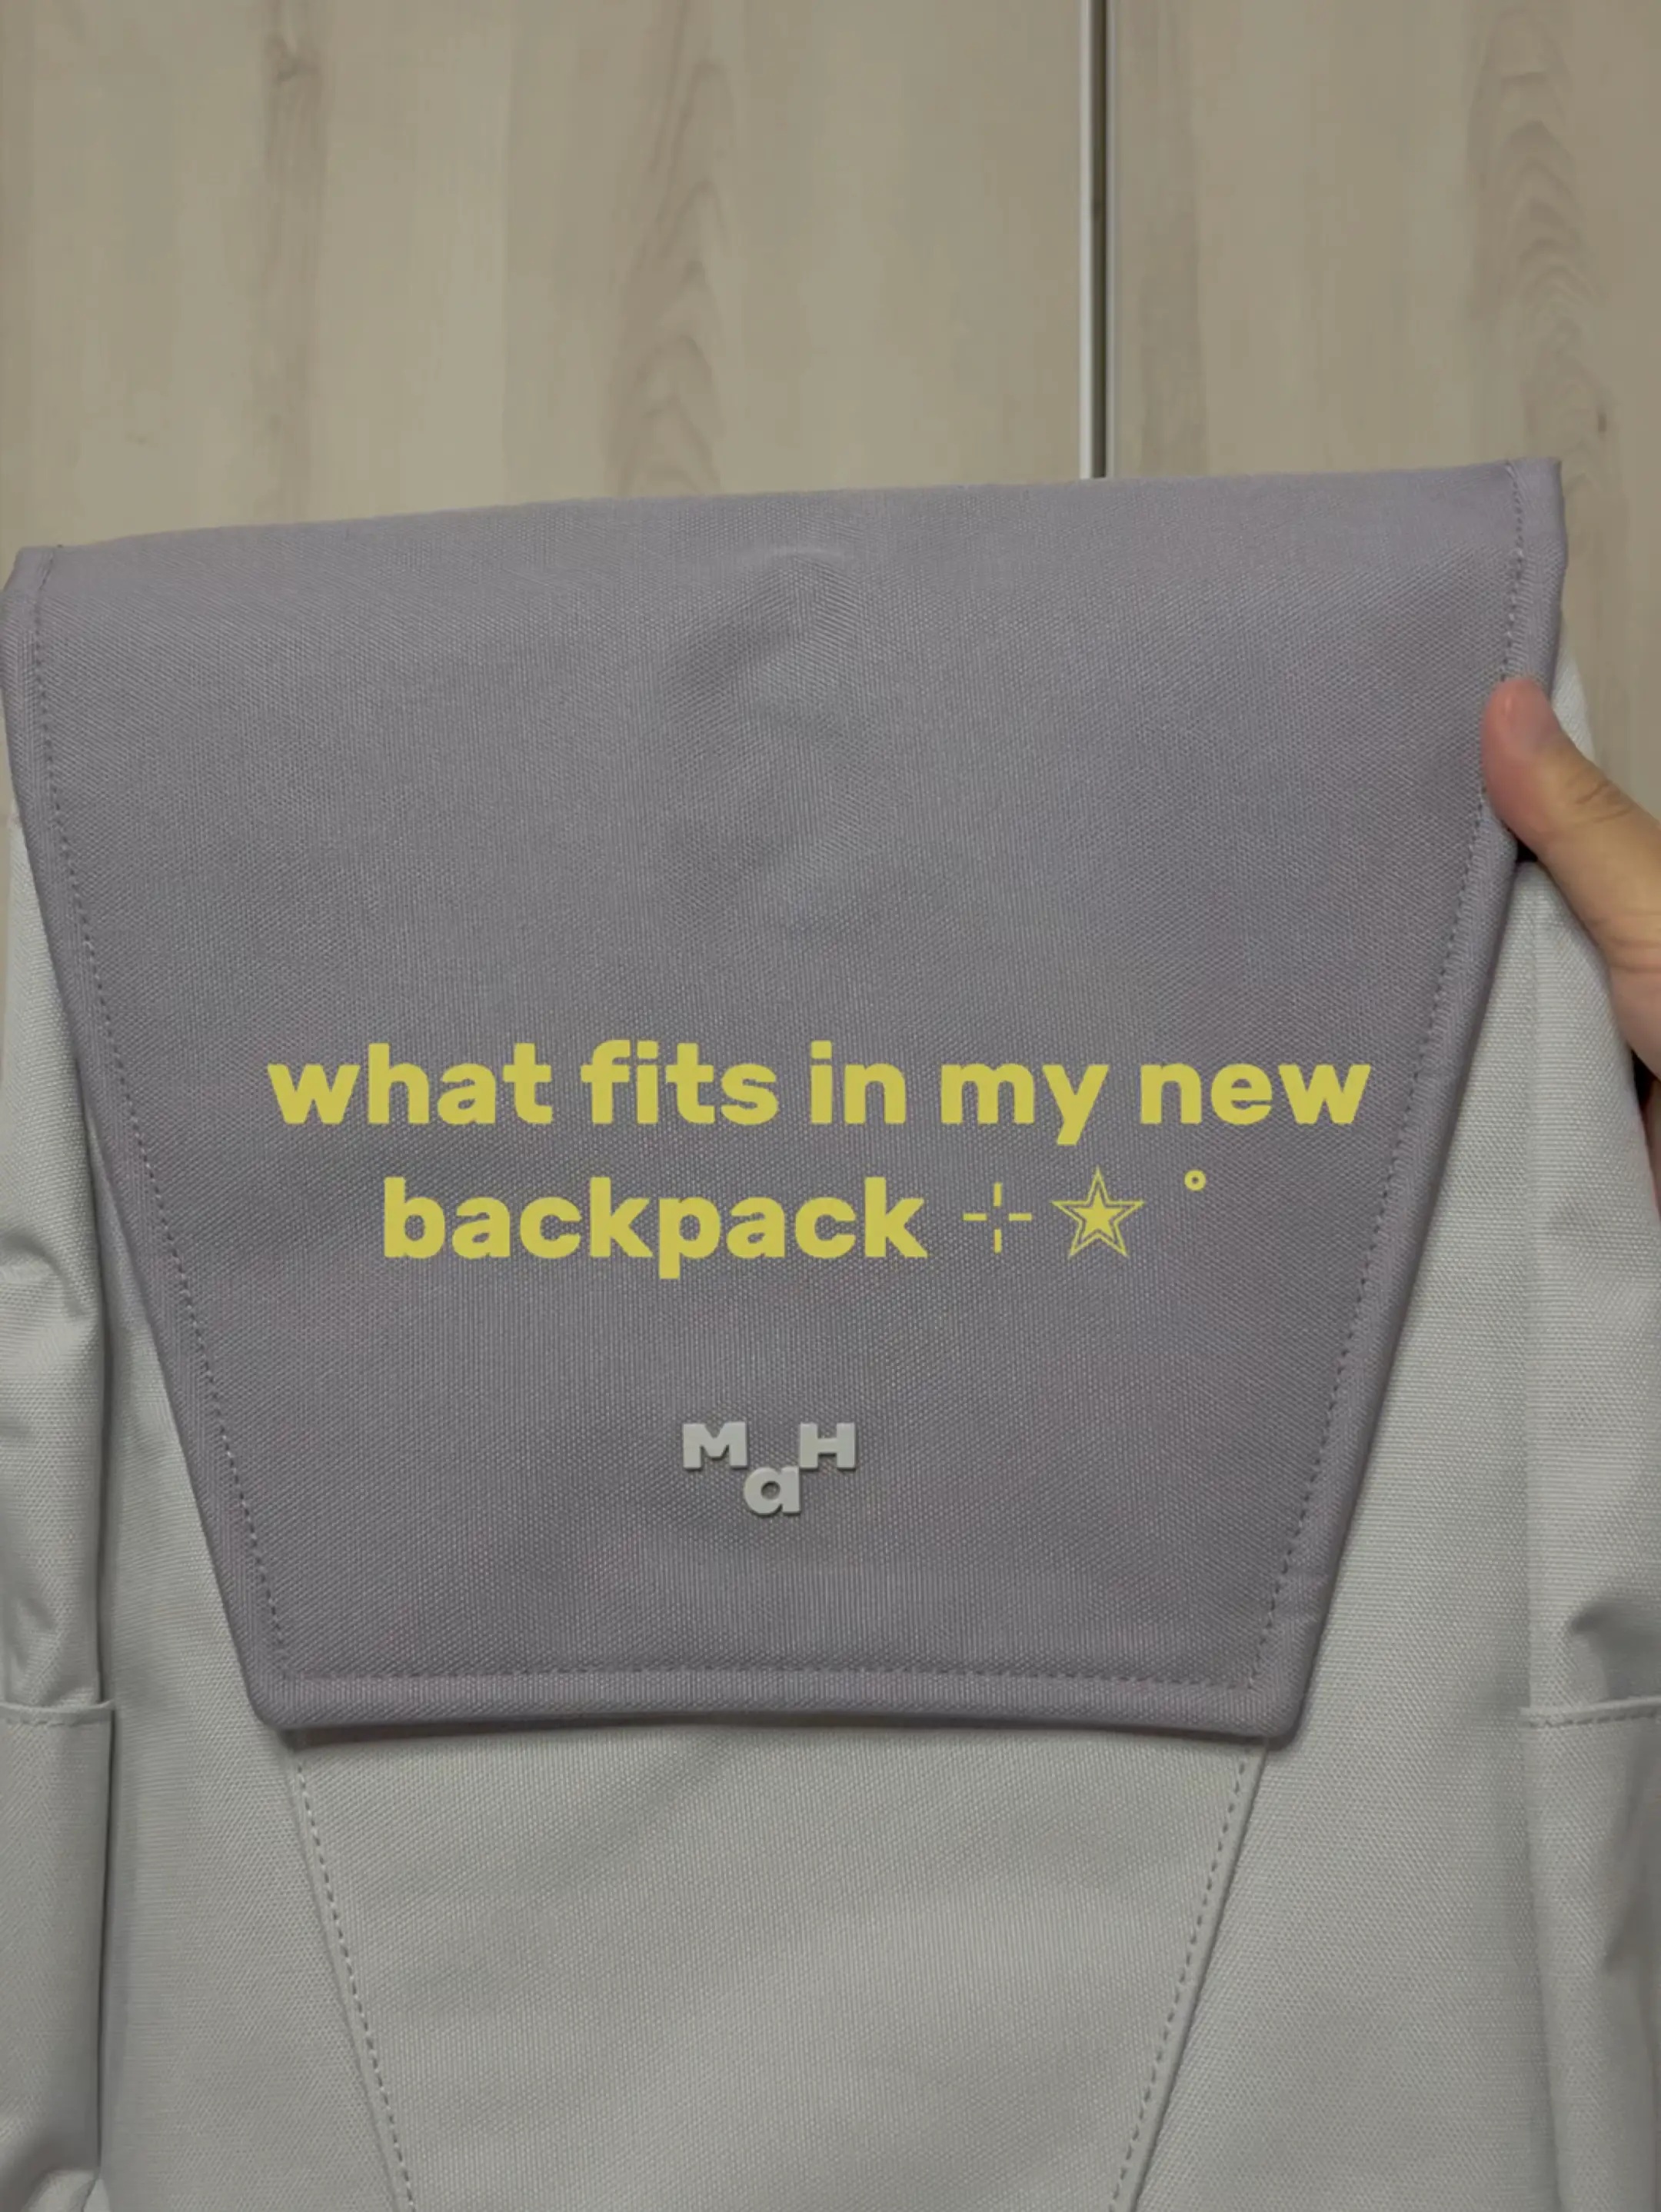 Unboxing my new backpack! I'd been looking for a new travel backpack t